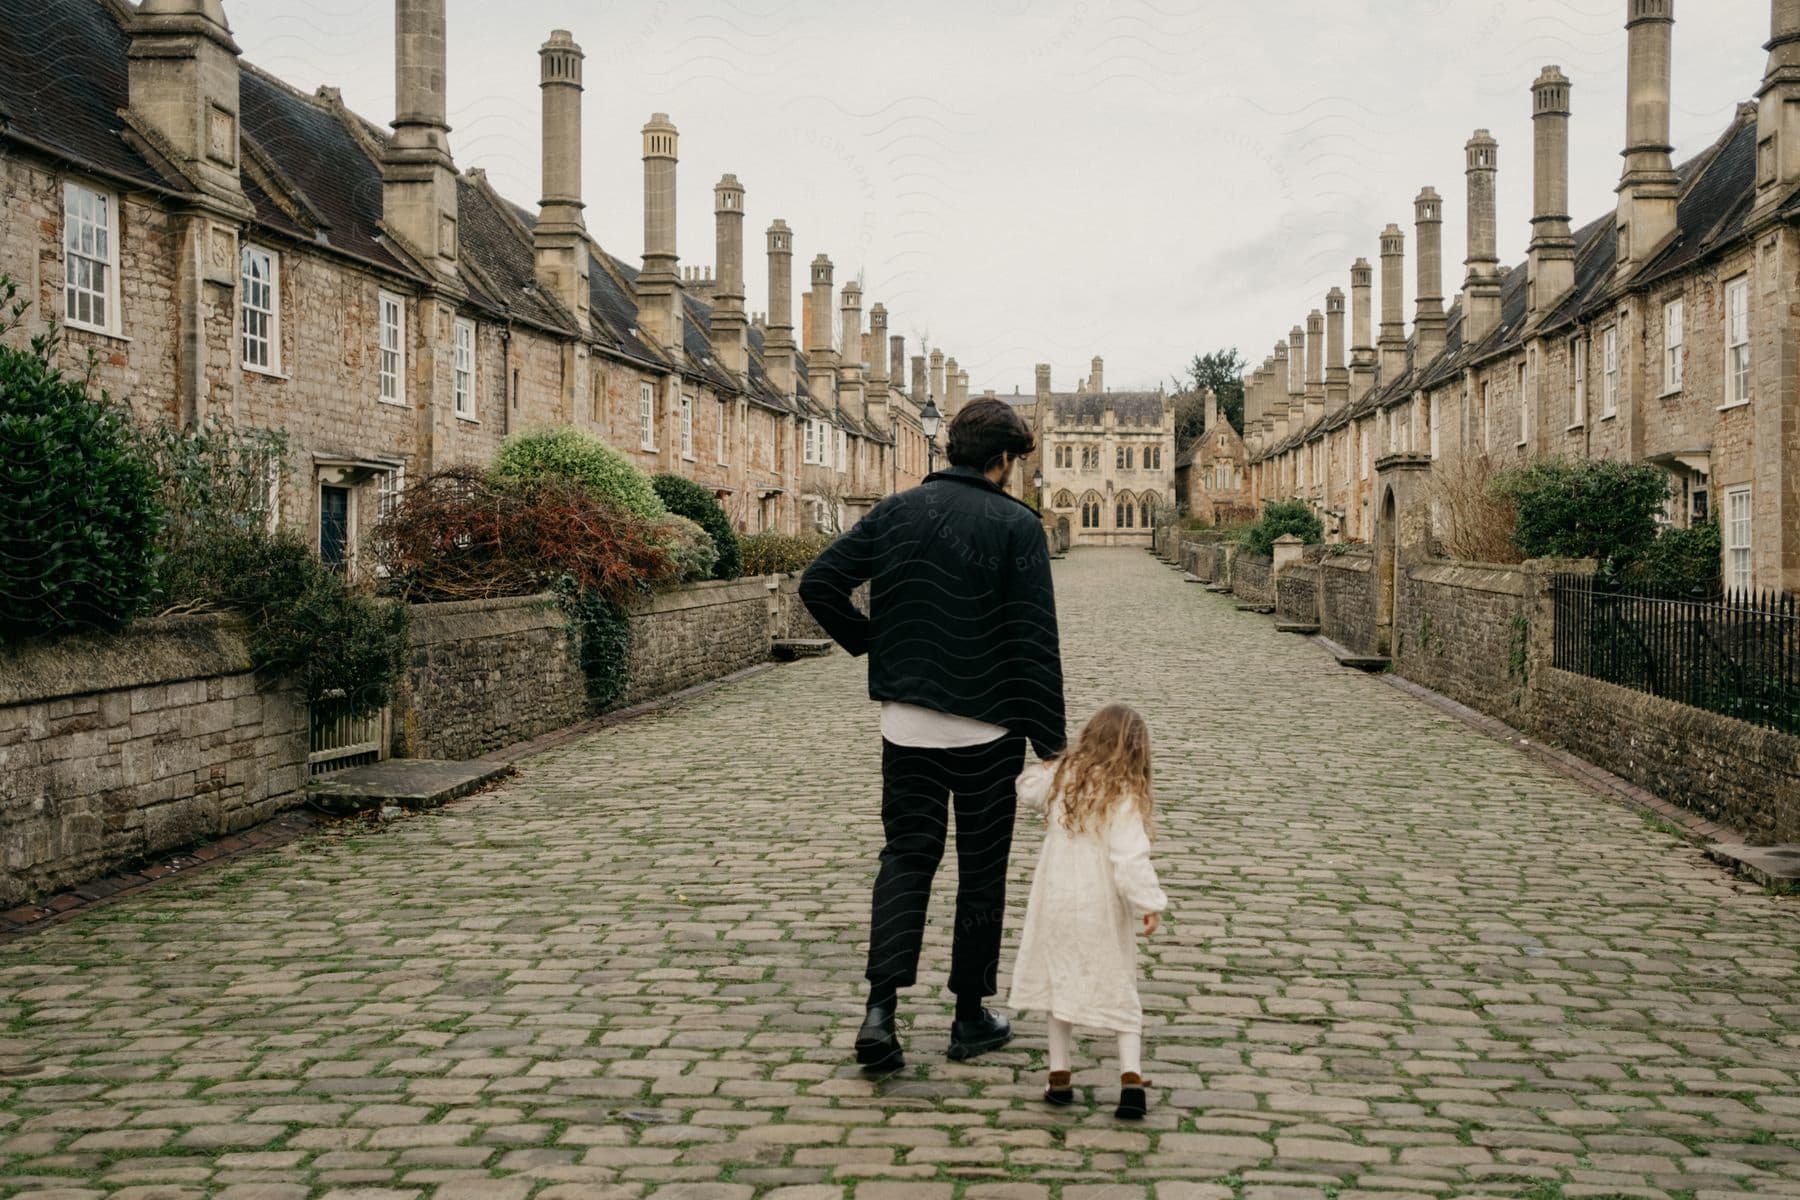 Father walking hand in hand with his daughter on Vicar's Close street.